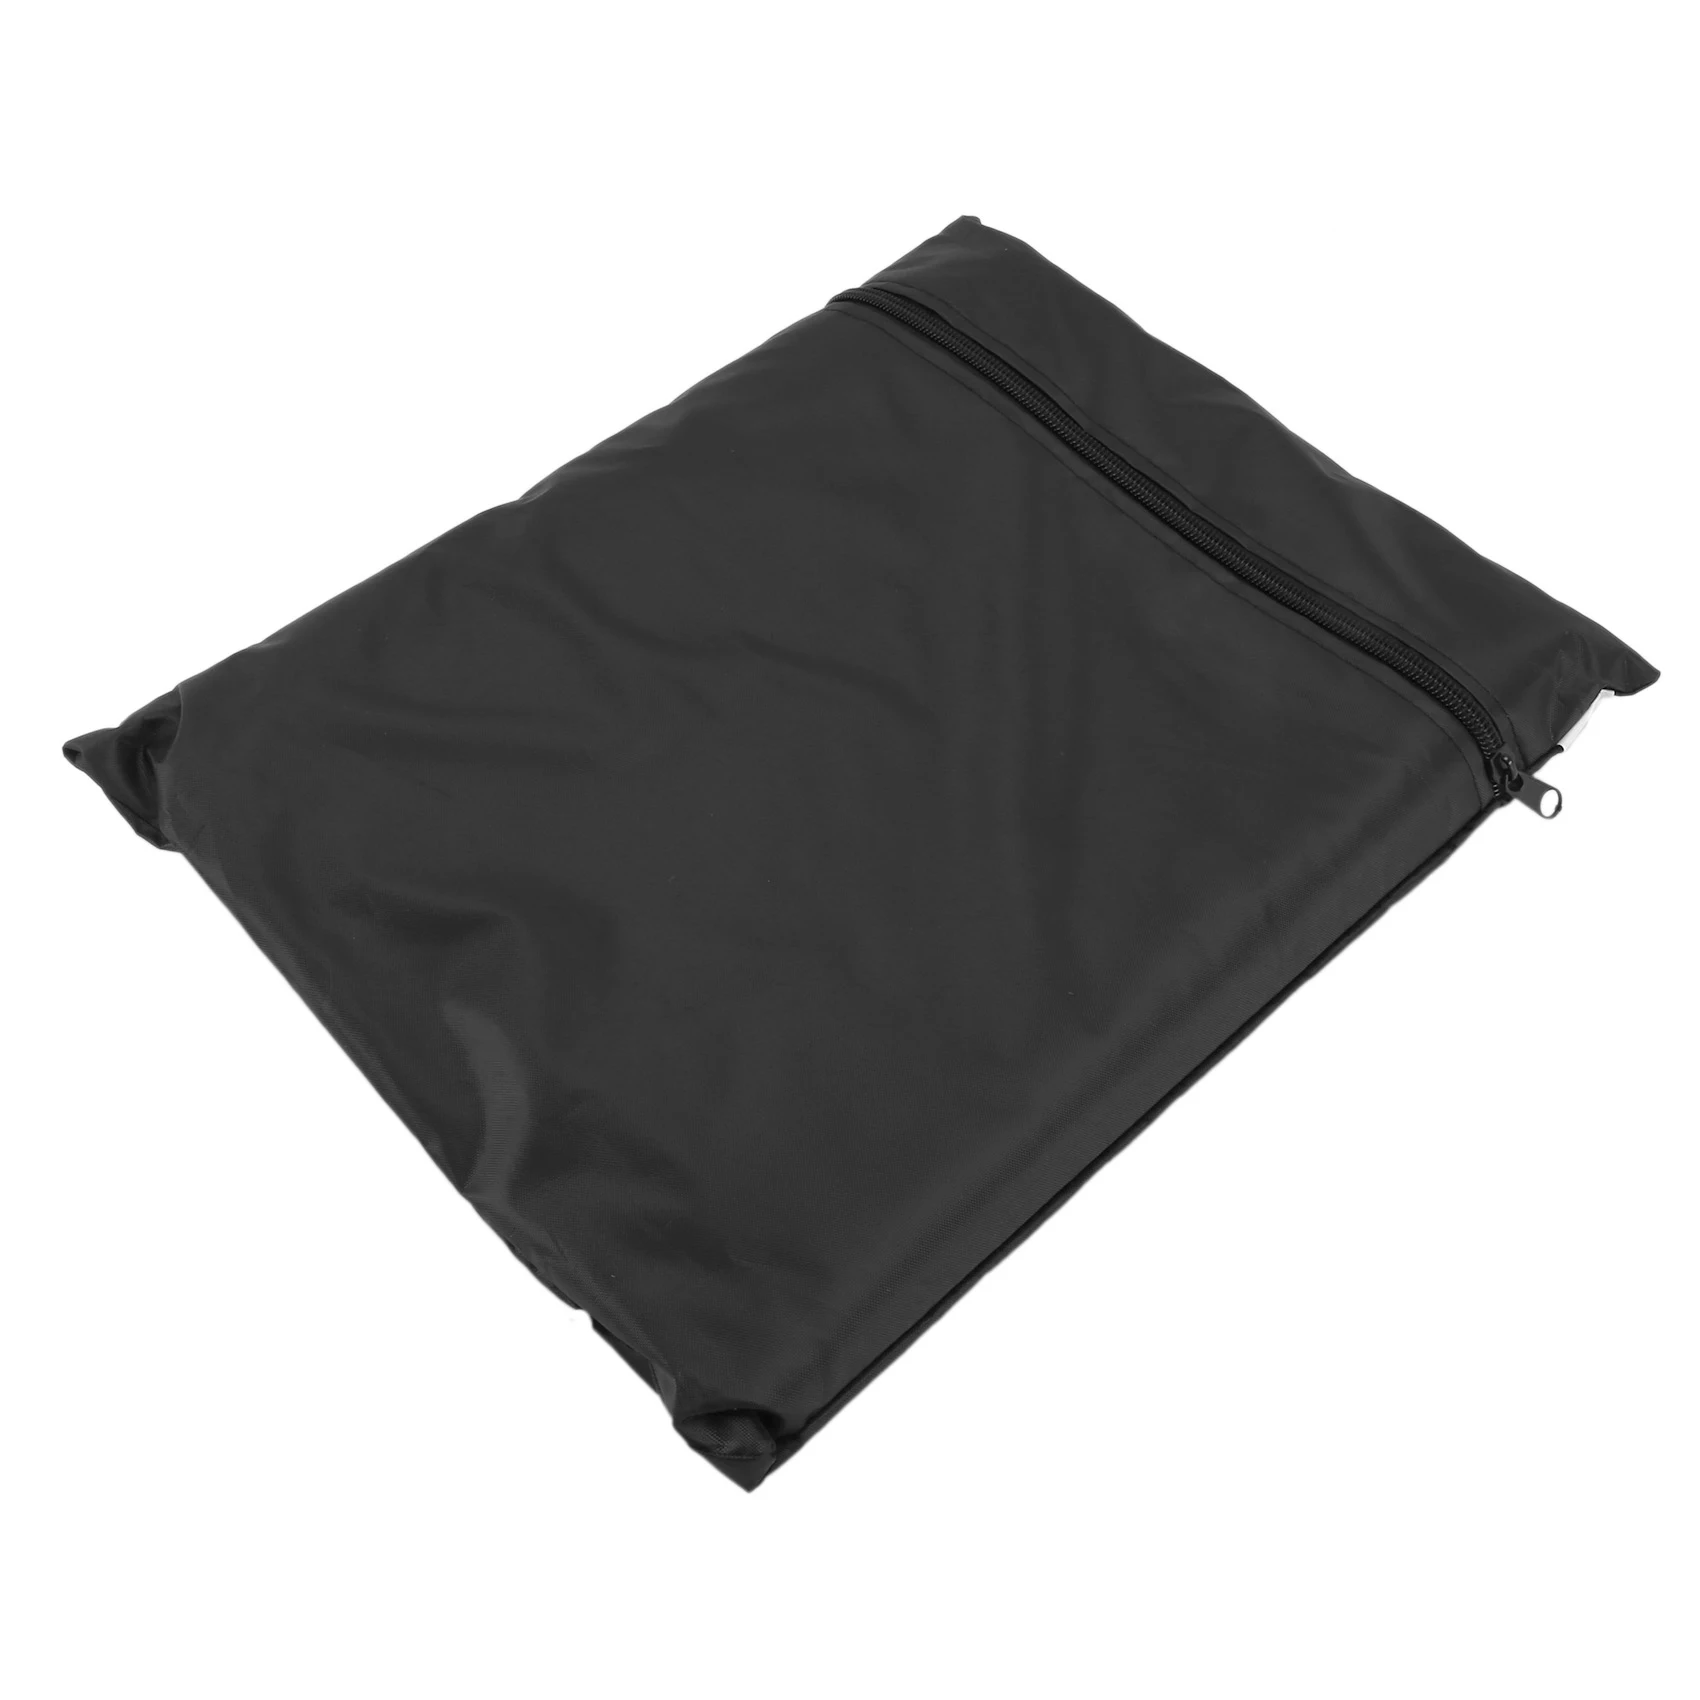 Washing Machine Cover Laundry Dryer Protect Dustproof Waterproof Sunscreen Cover-Black